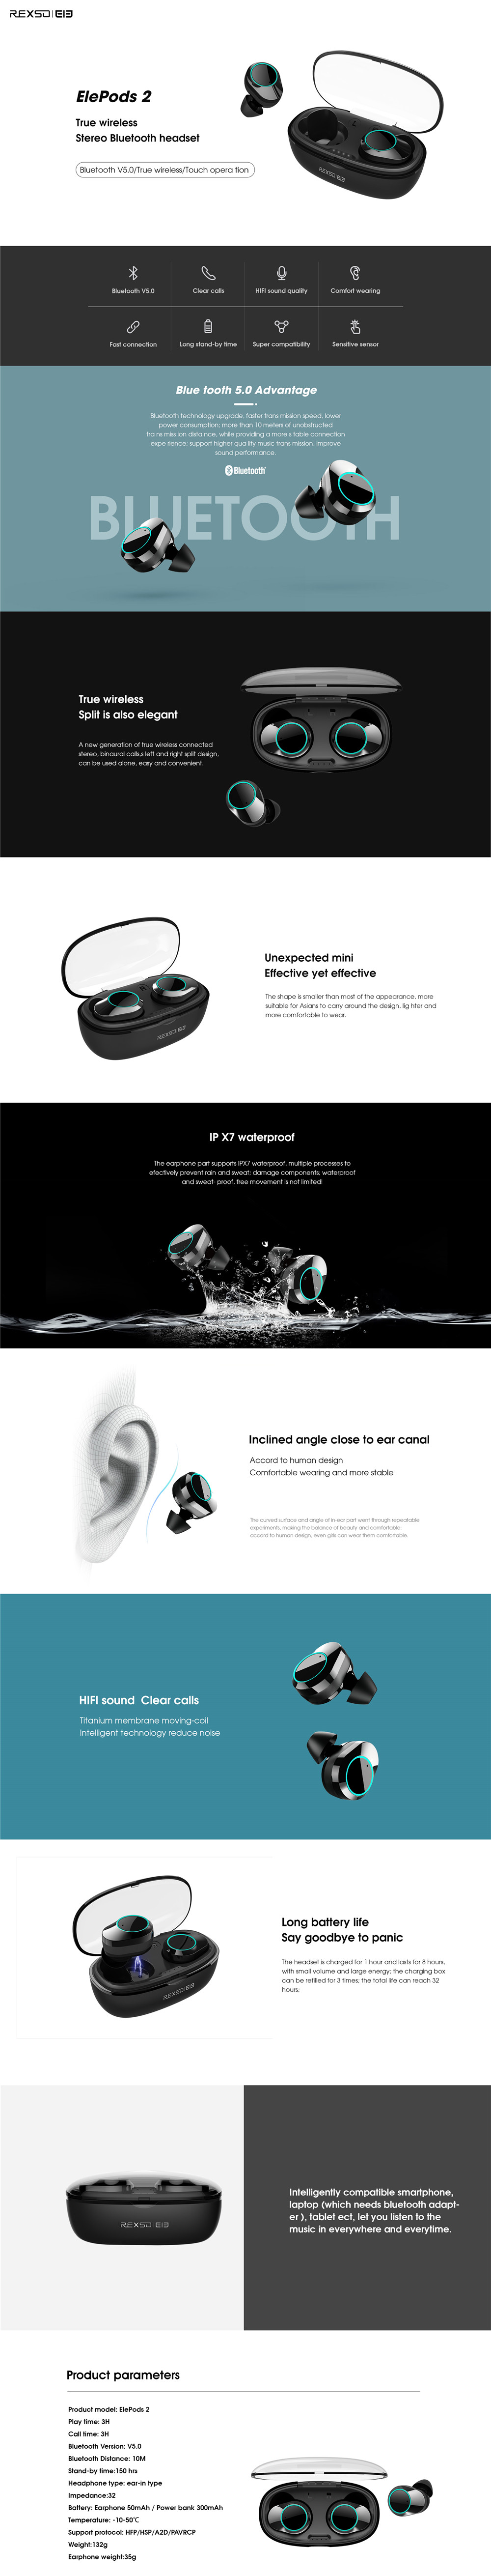 Elephone-ELEPODS-2-TWS-Touch-Control-Stereo-bluetooth-V50-Headset-HiFi-Clear-Call-IPX7-Waterproof-In-1686031-1